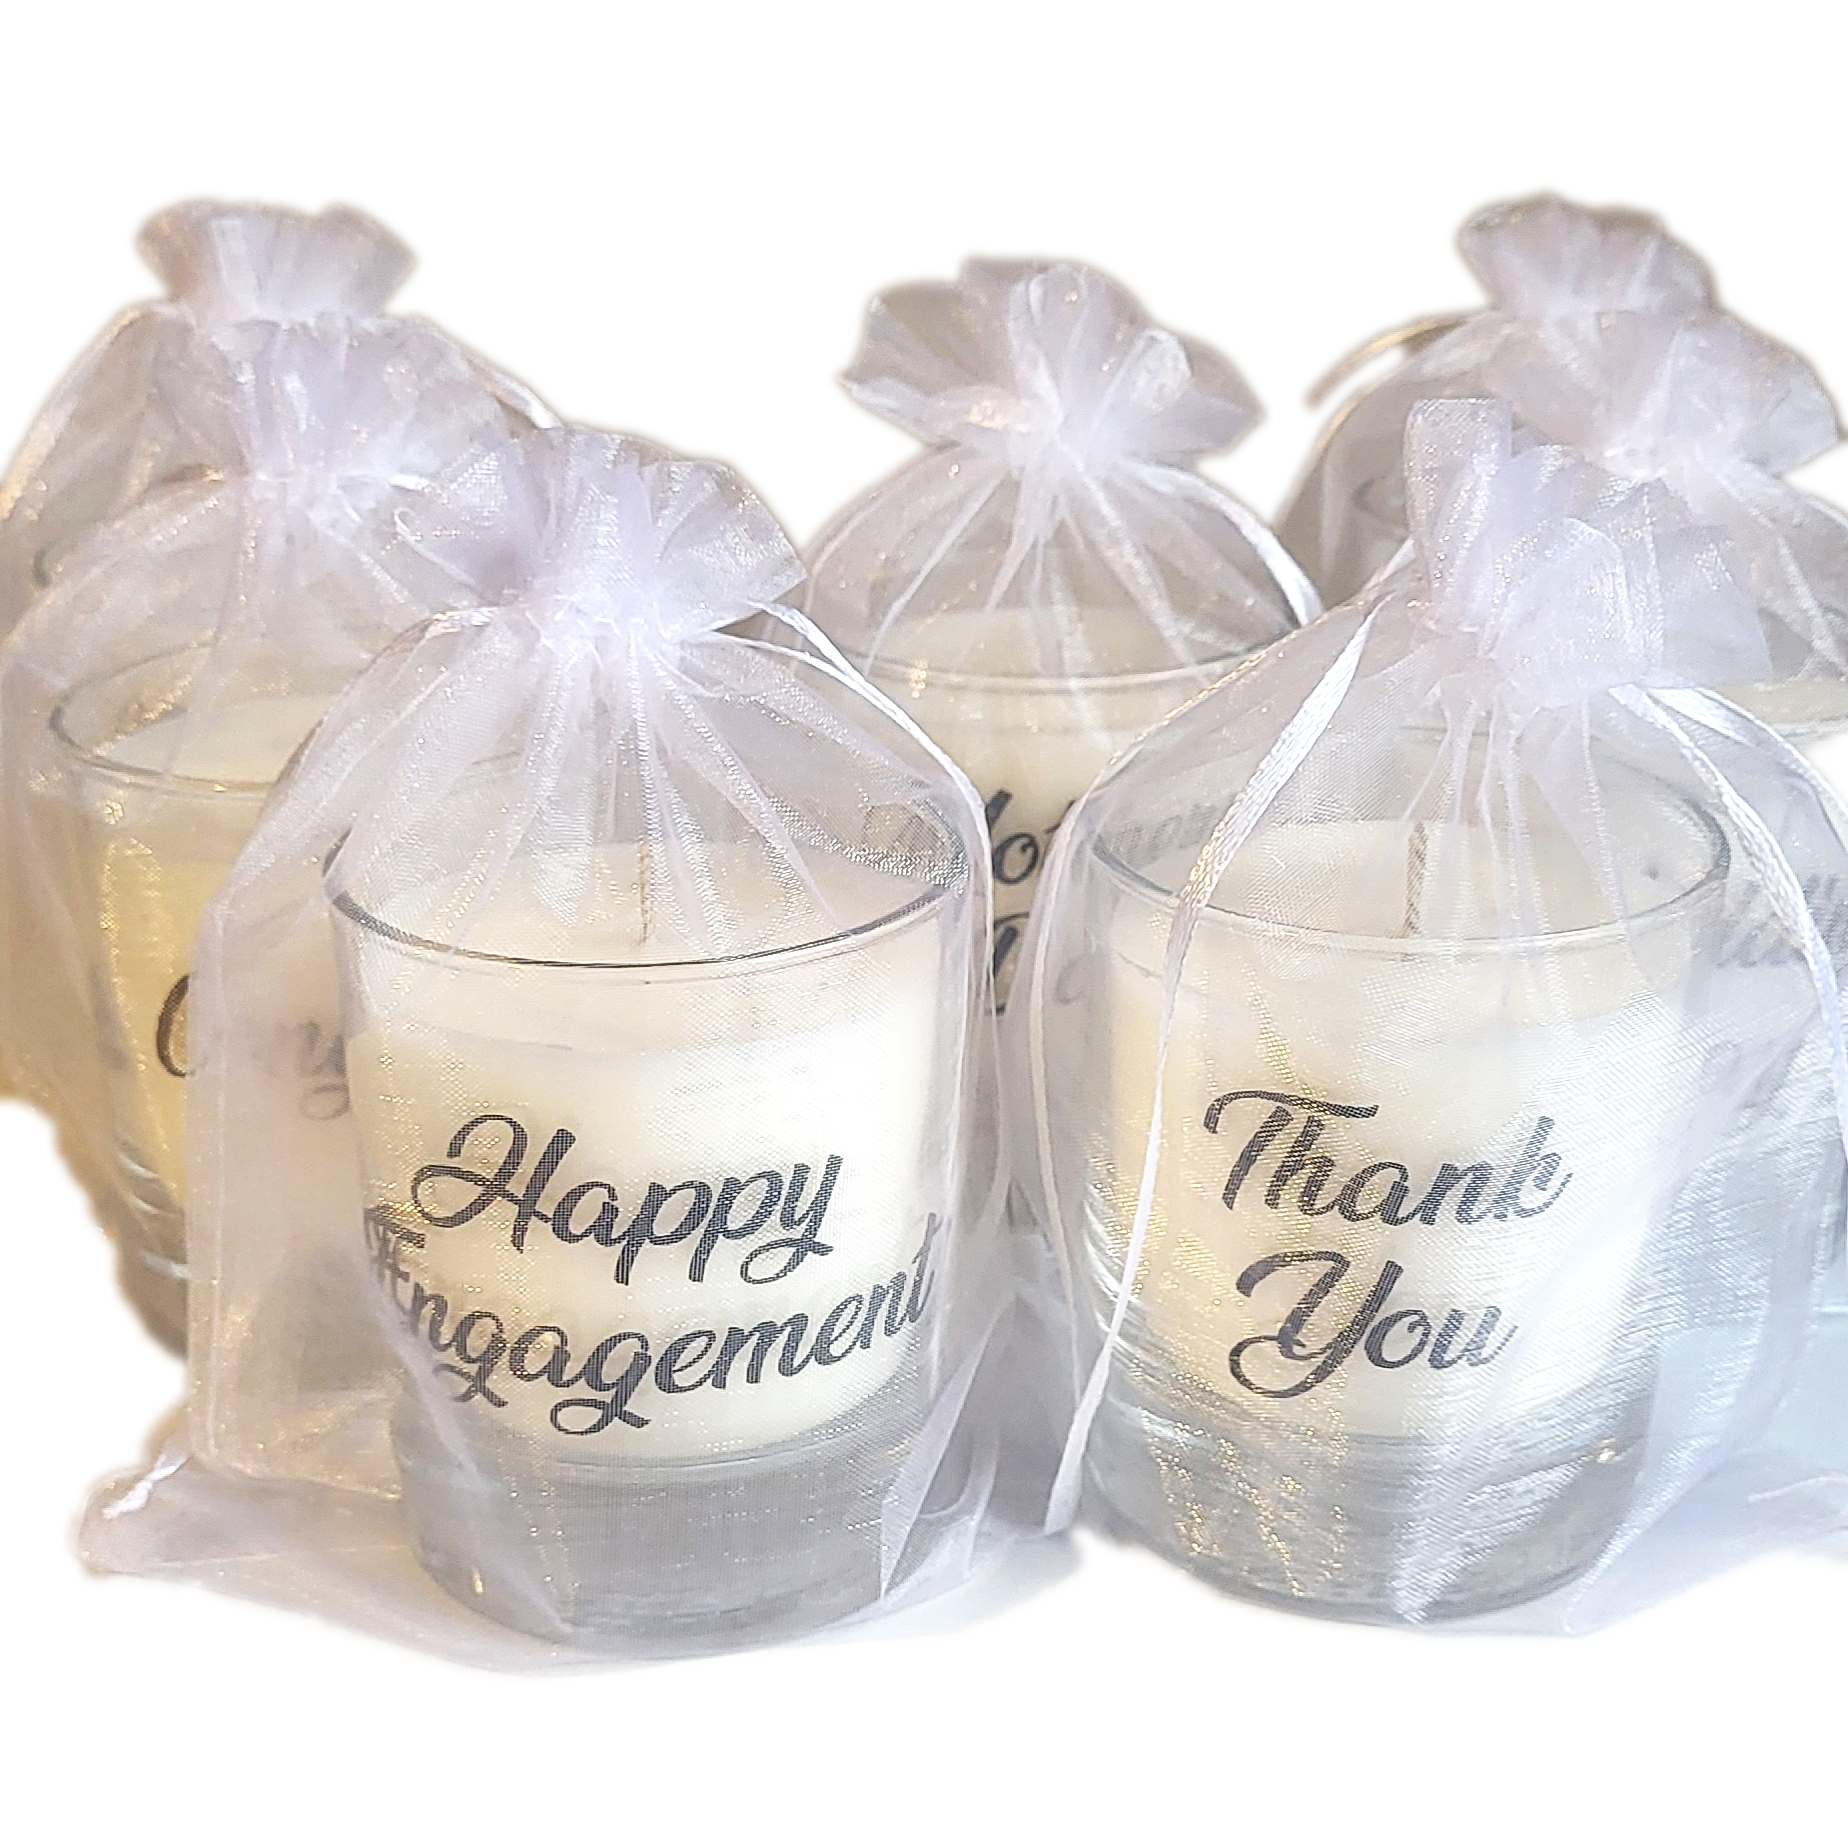 Happy Engagement Candle 20cl (Special Offer)